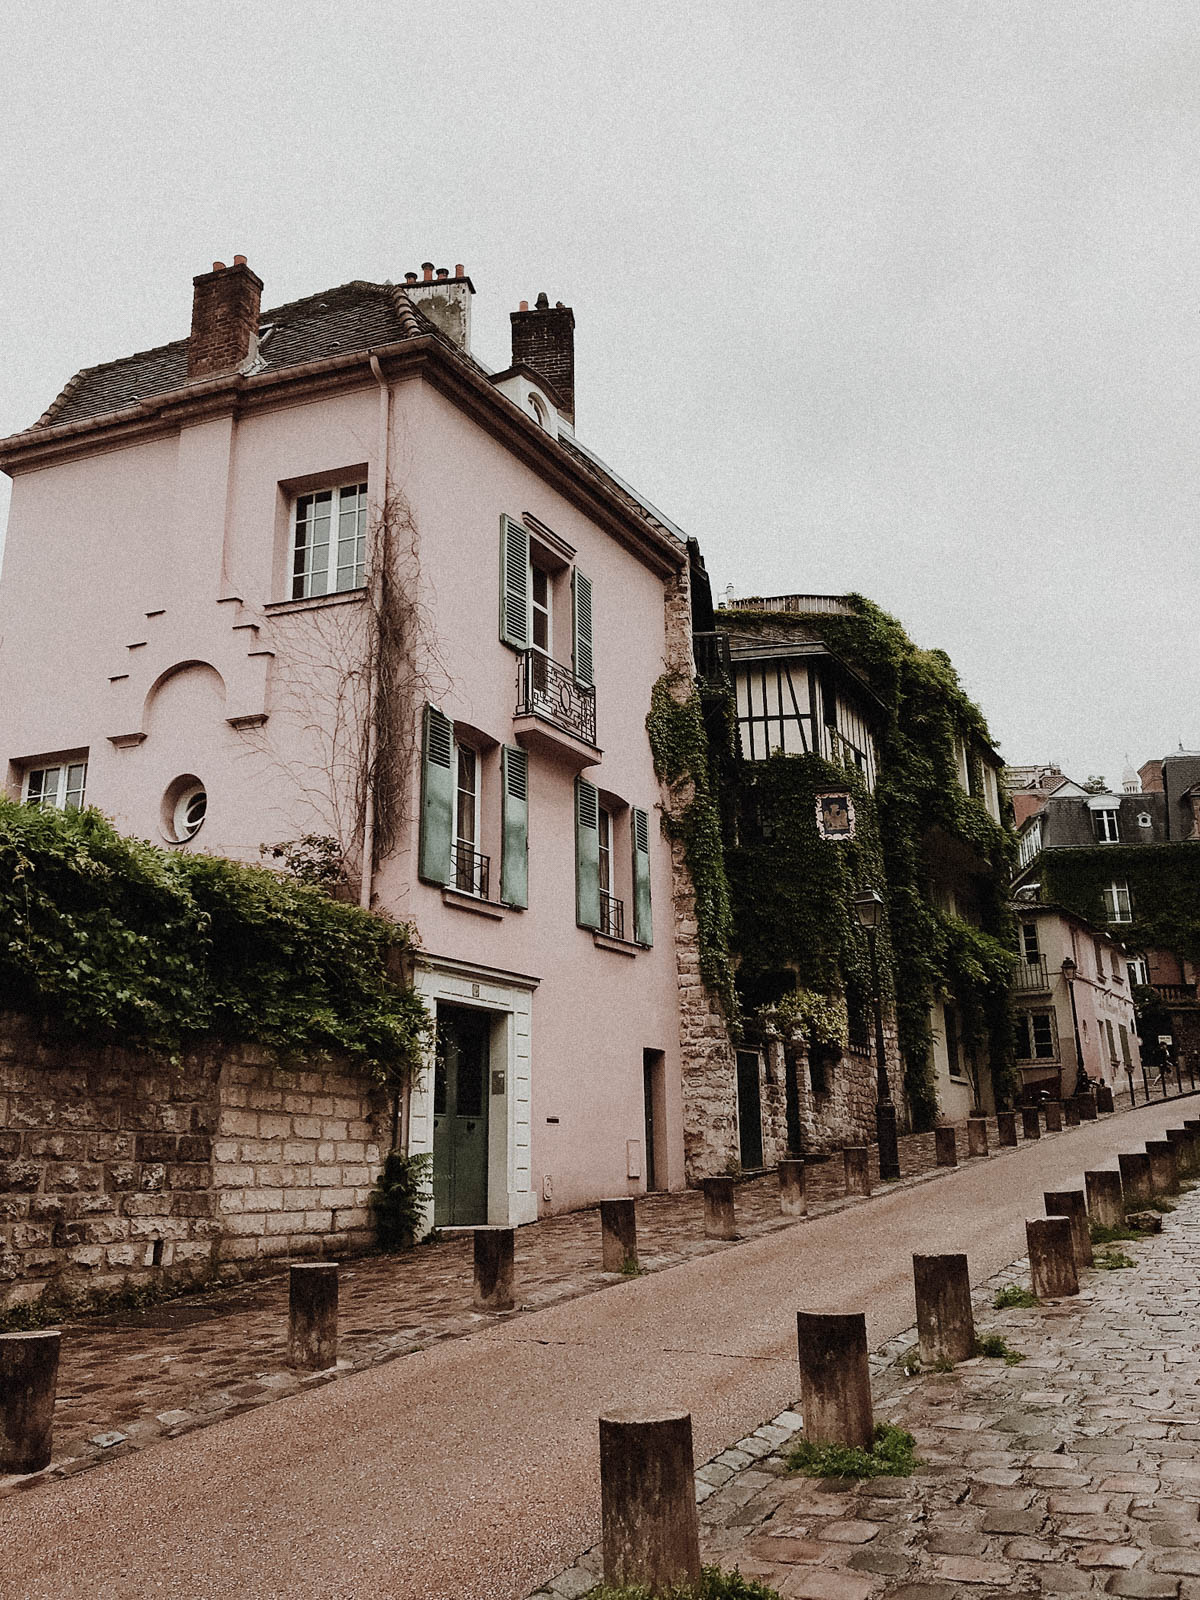 Paris France Travel Guide - Pink European Architecture and Buildings / RG Daily Blog